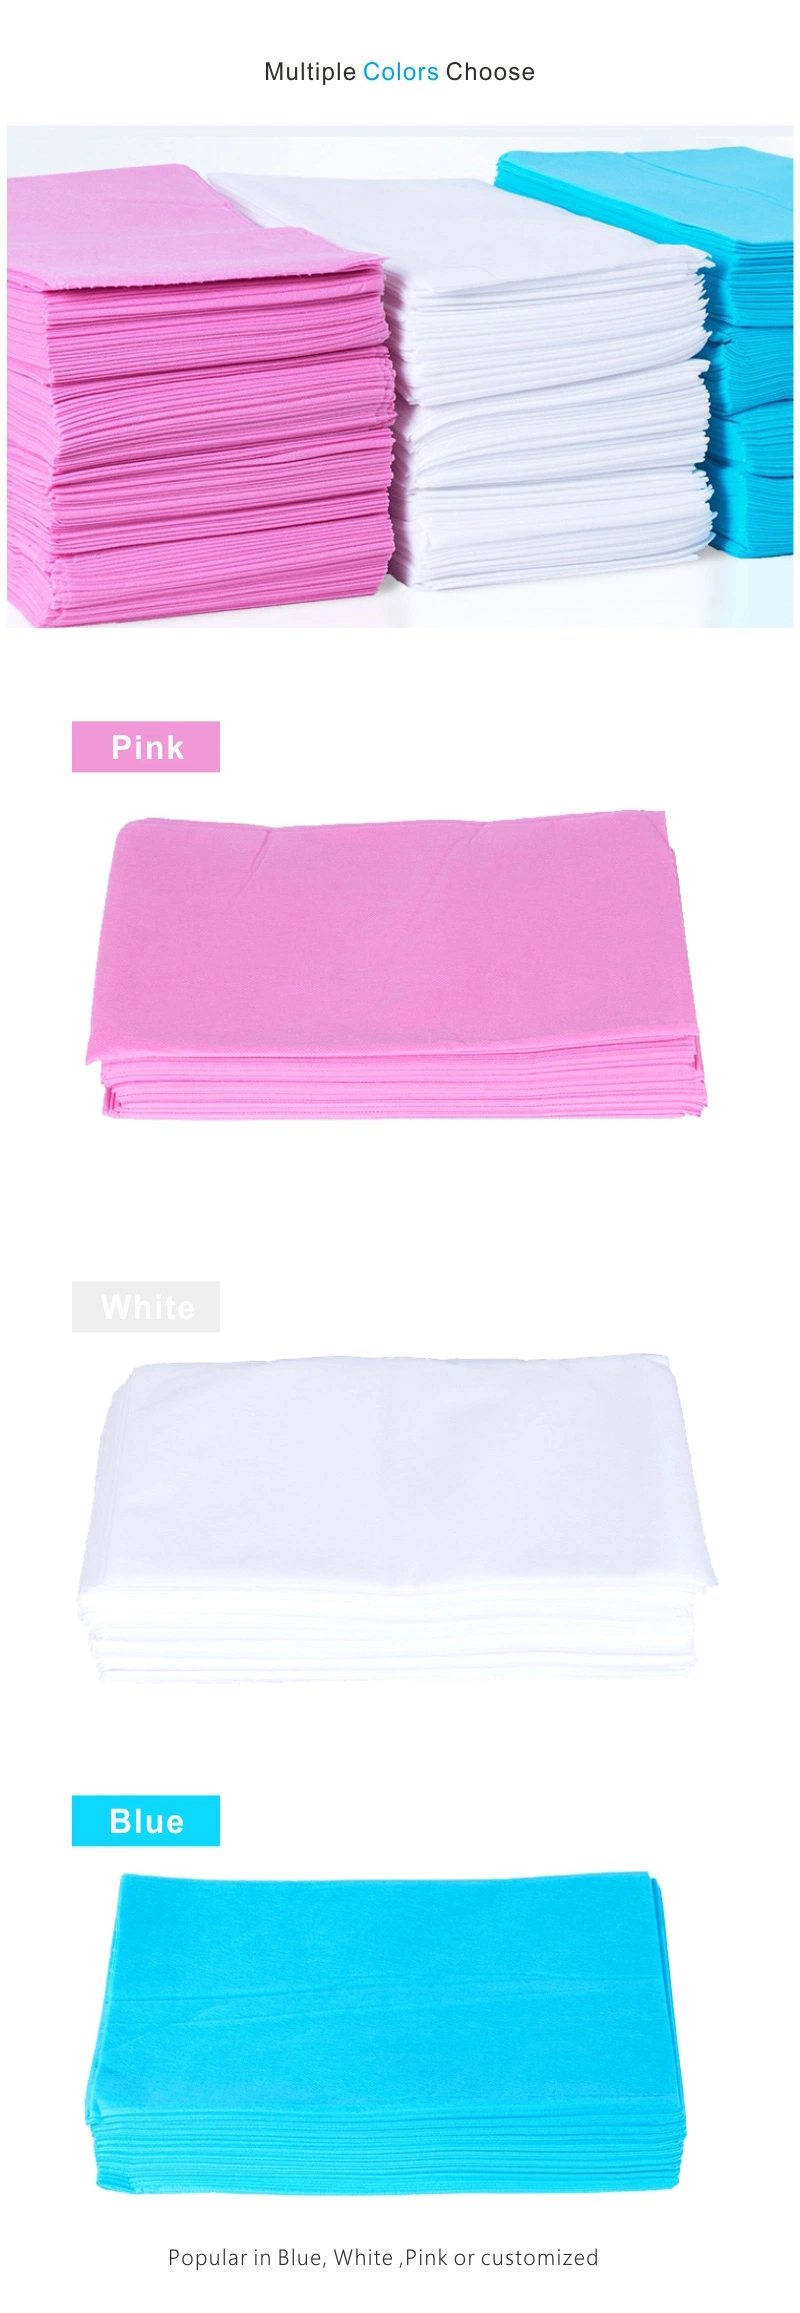 Disposable Nonwoven Examination Hospital Table Bed Cover Linen Roll